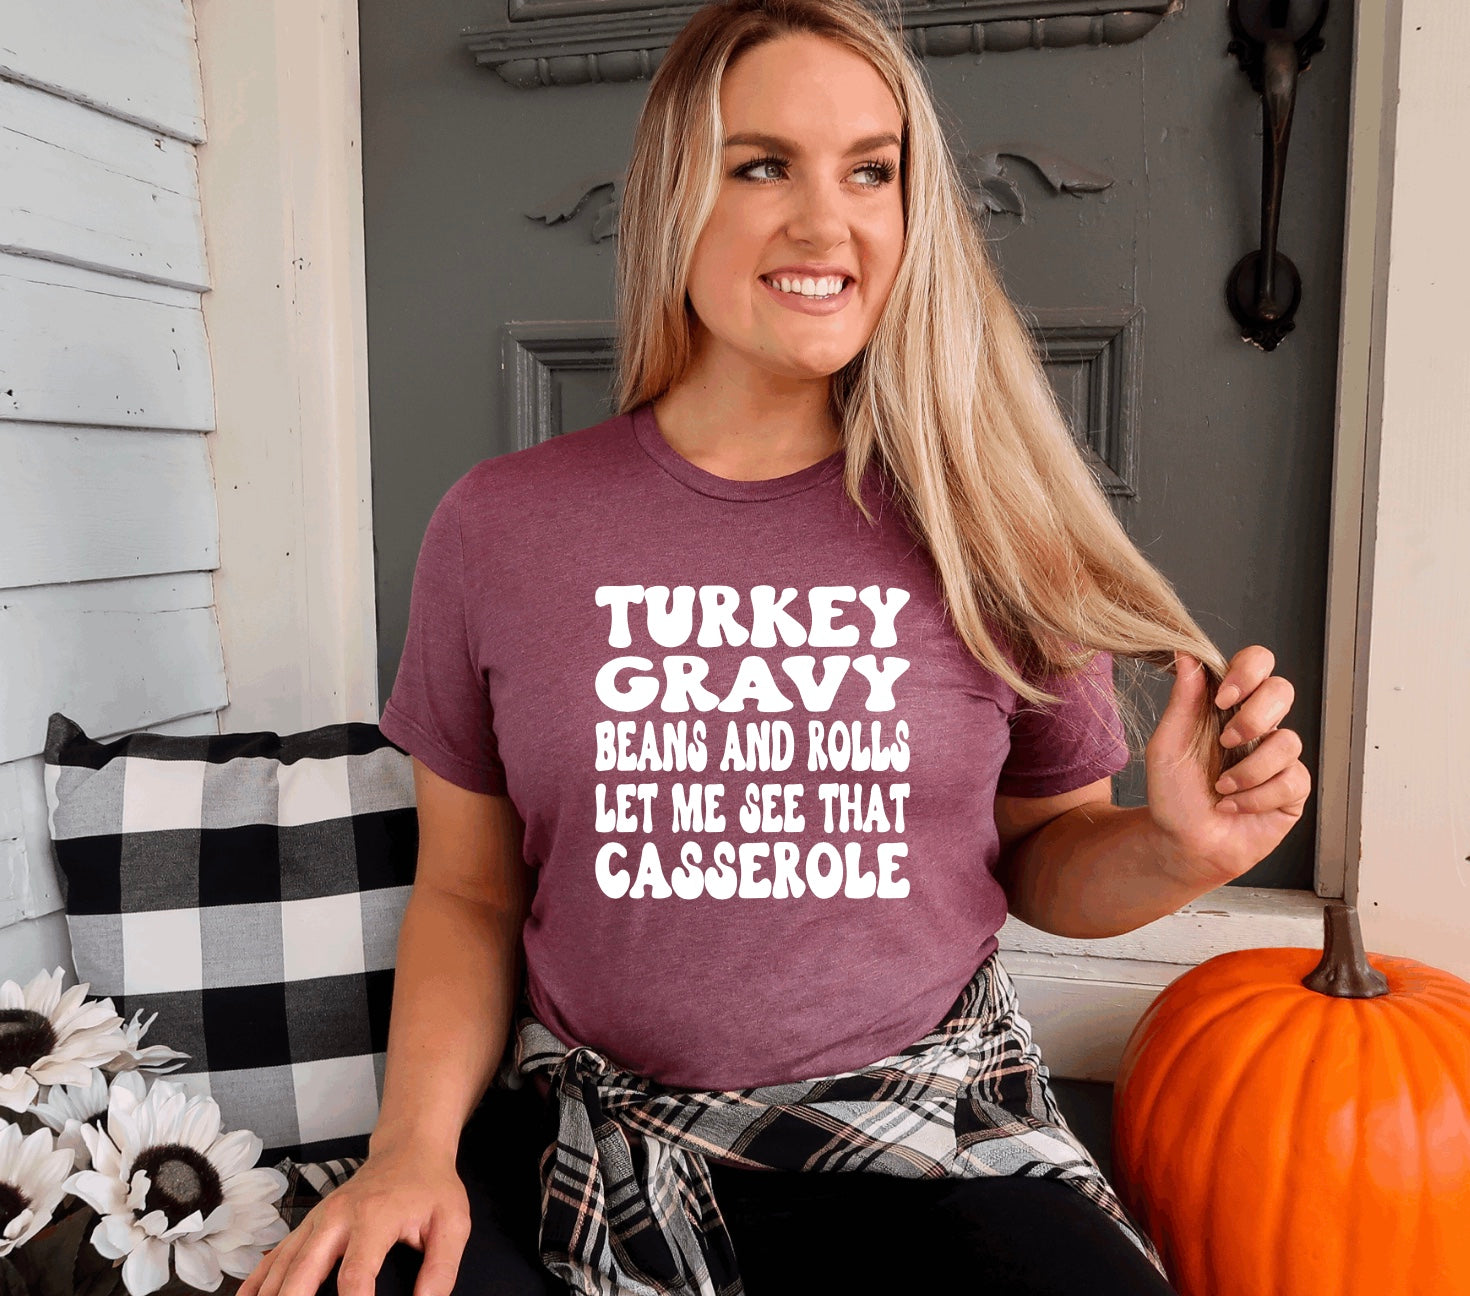 Turkey gravy beans and rolls let me see that casserole | funny thanksgiving t-shirt in heather maroon 